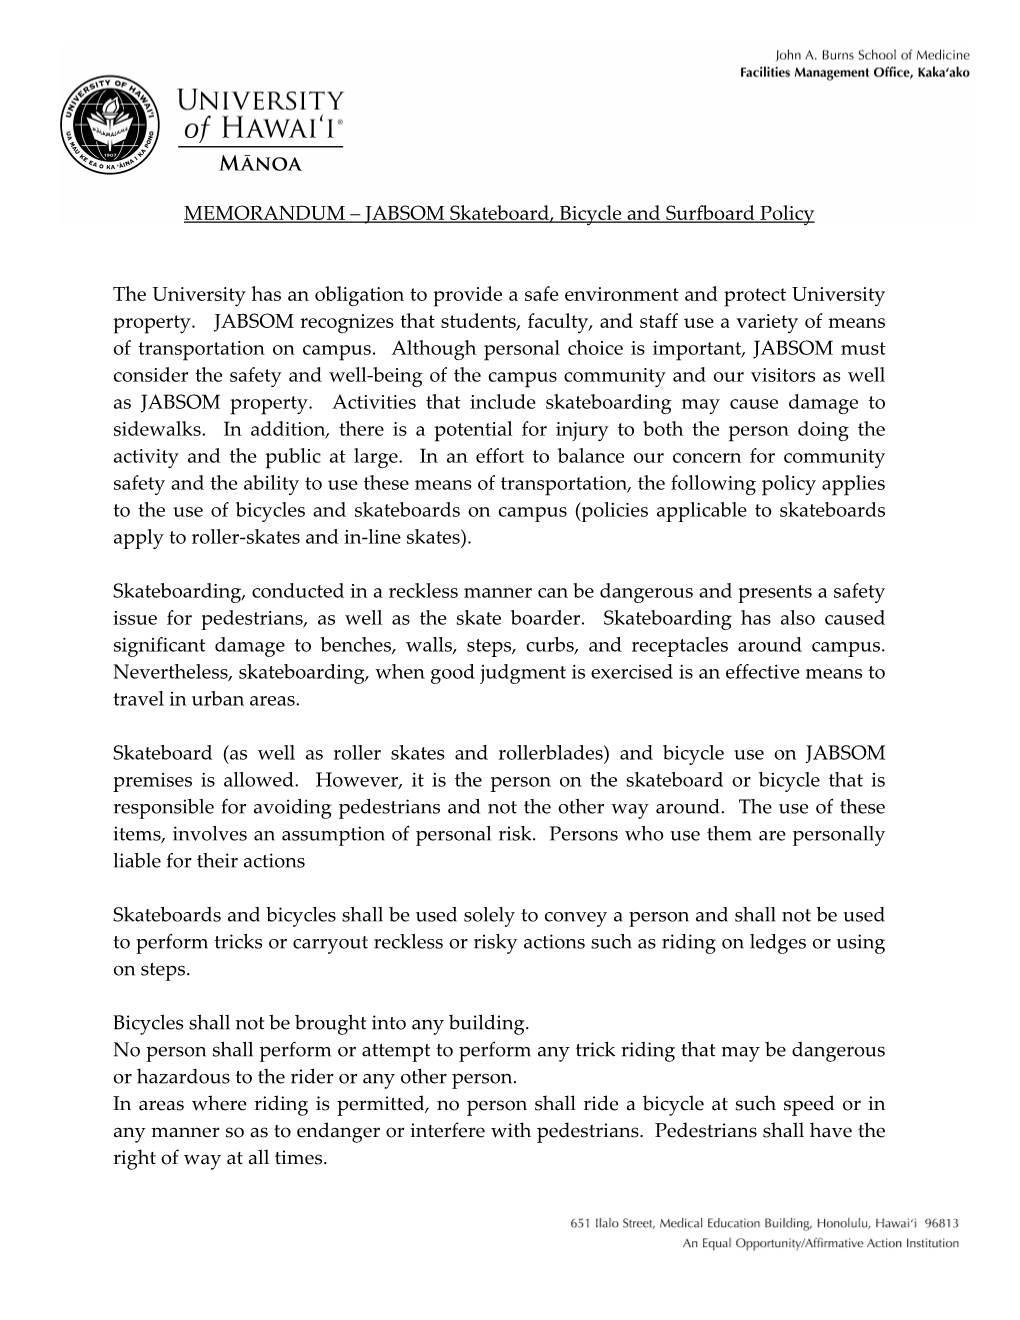 MEMORANDUM – JABSOM Skateboard, Bicycle and Surfboard Policy the University Has an Obligation to Provide a Safe Environment An